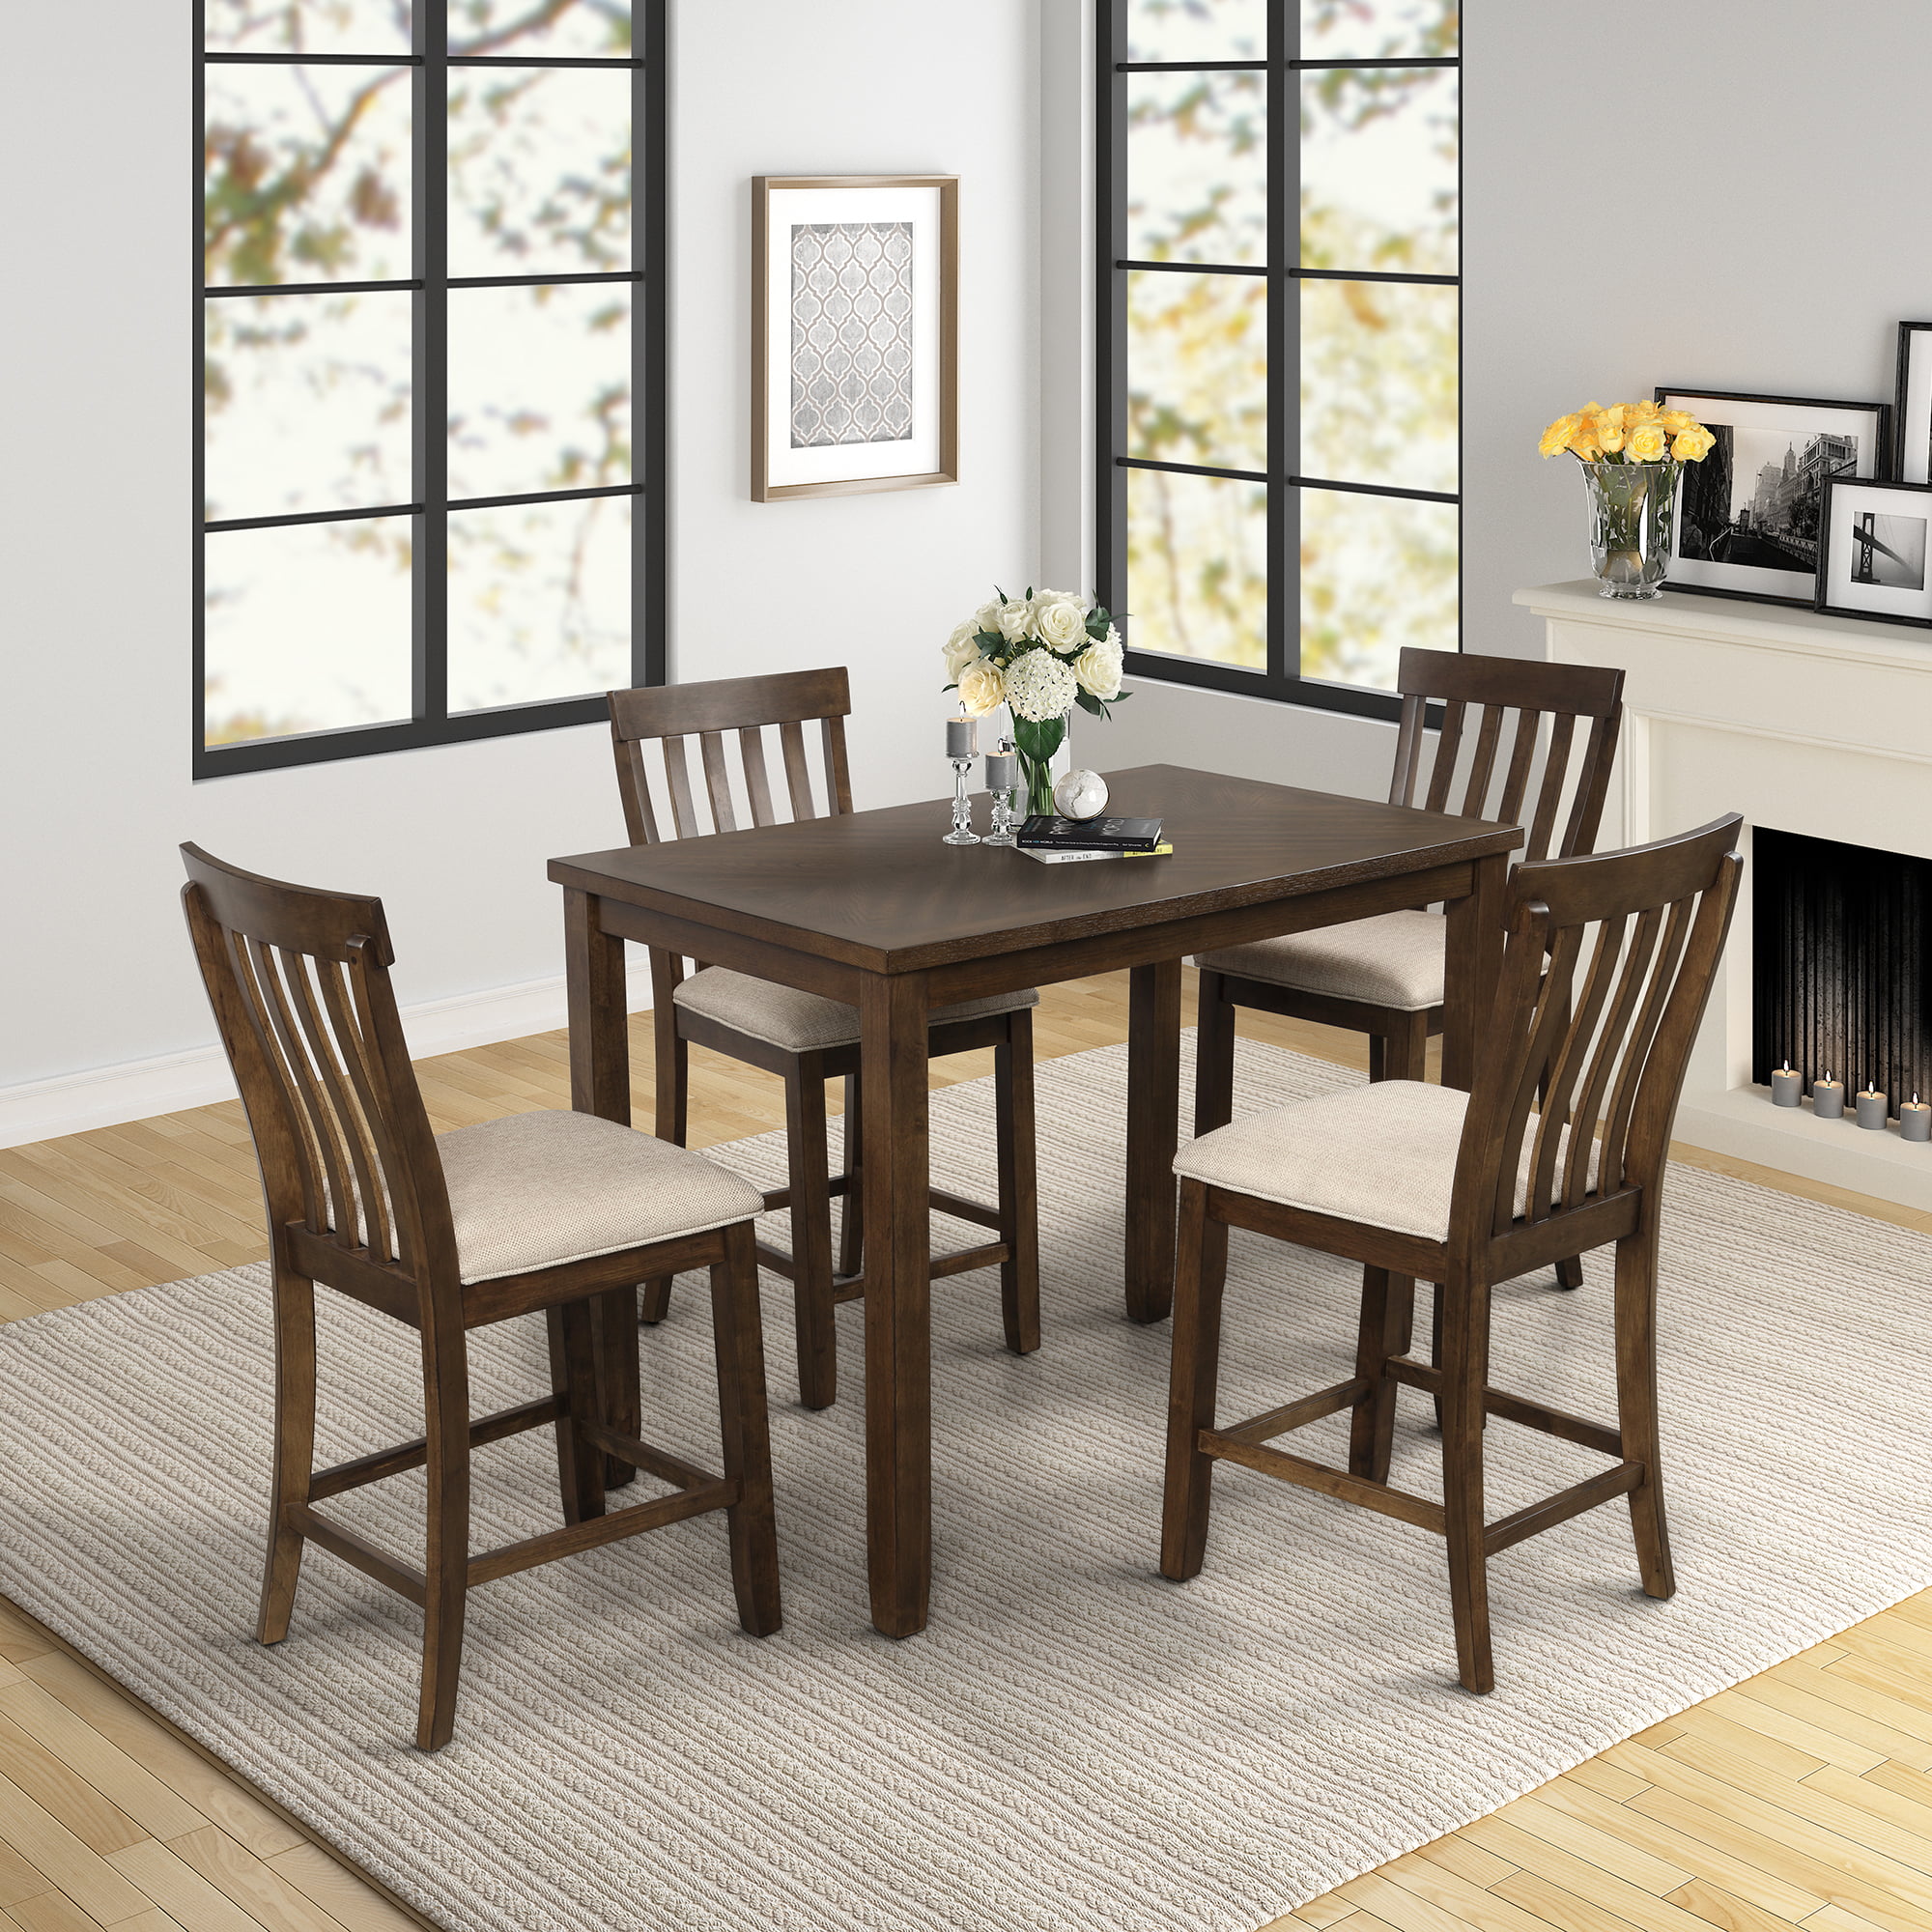 5 Piece Dining Table and Chair Set, Wooden Dining Room Table and Set of ...